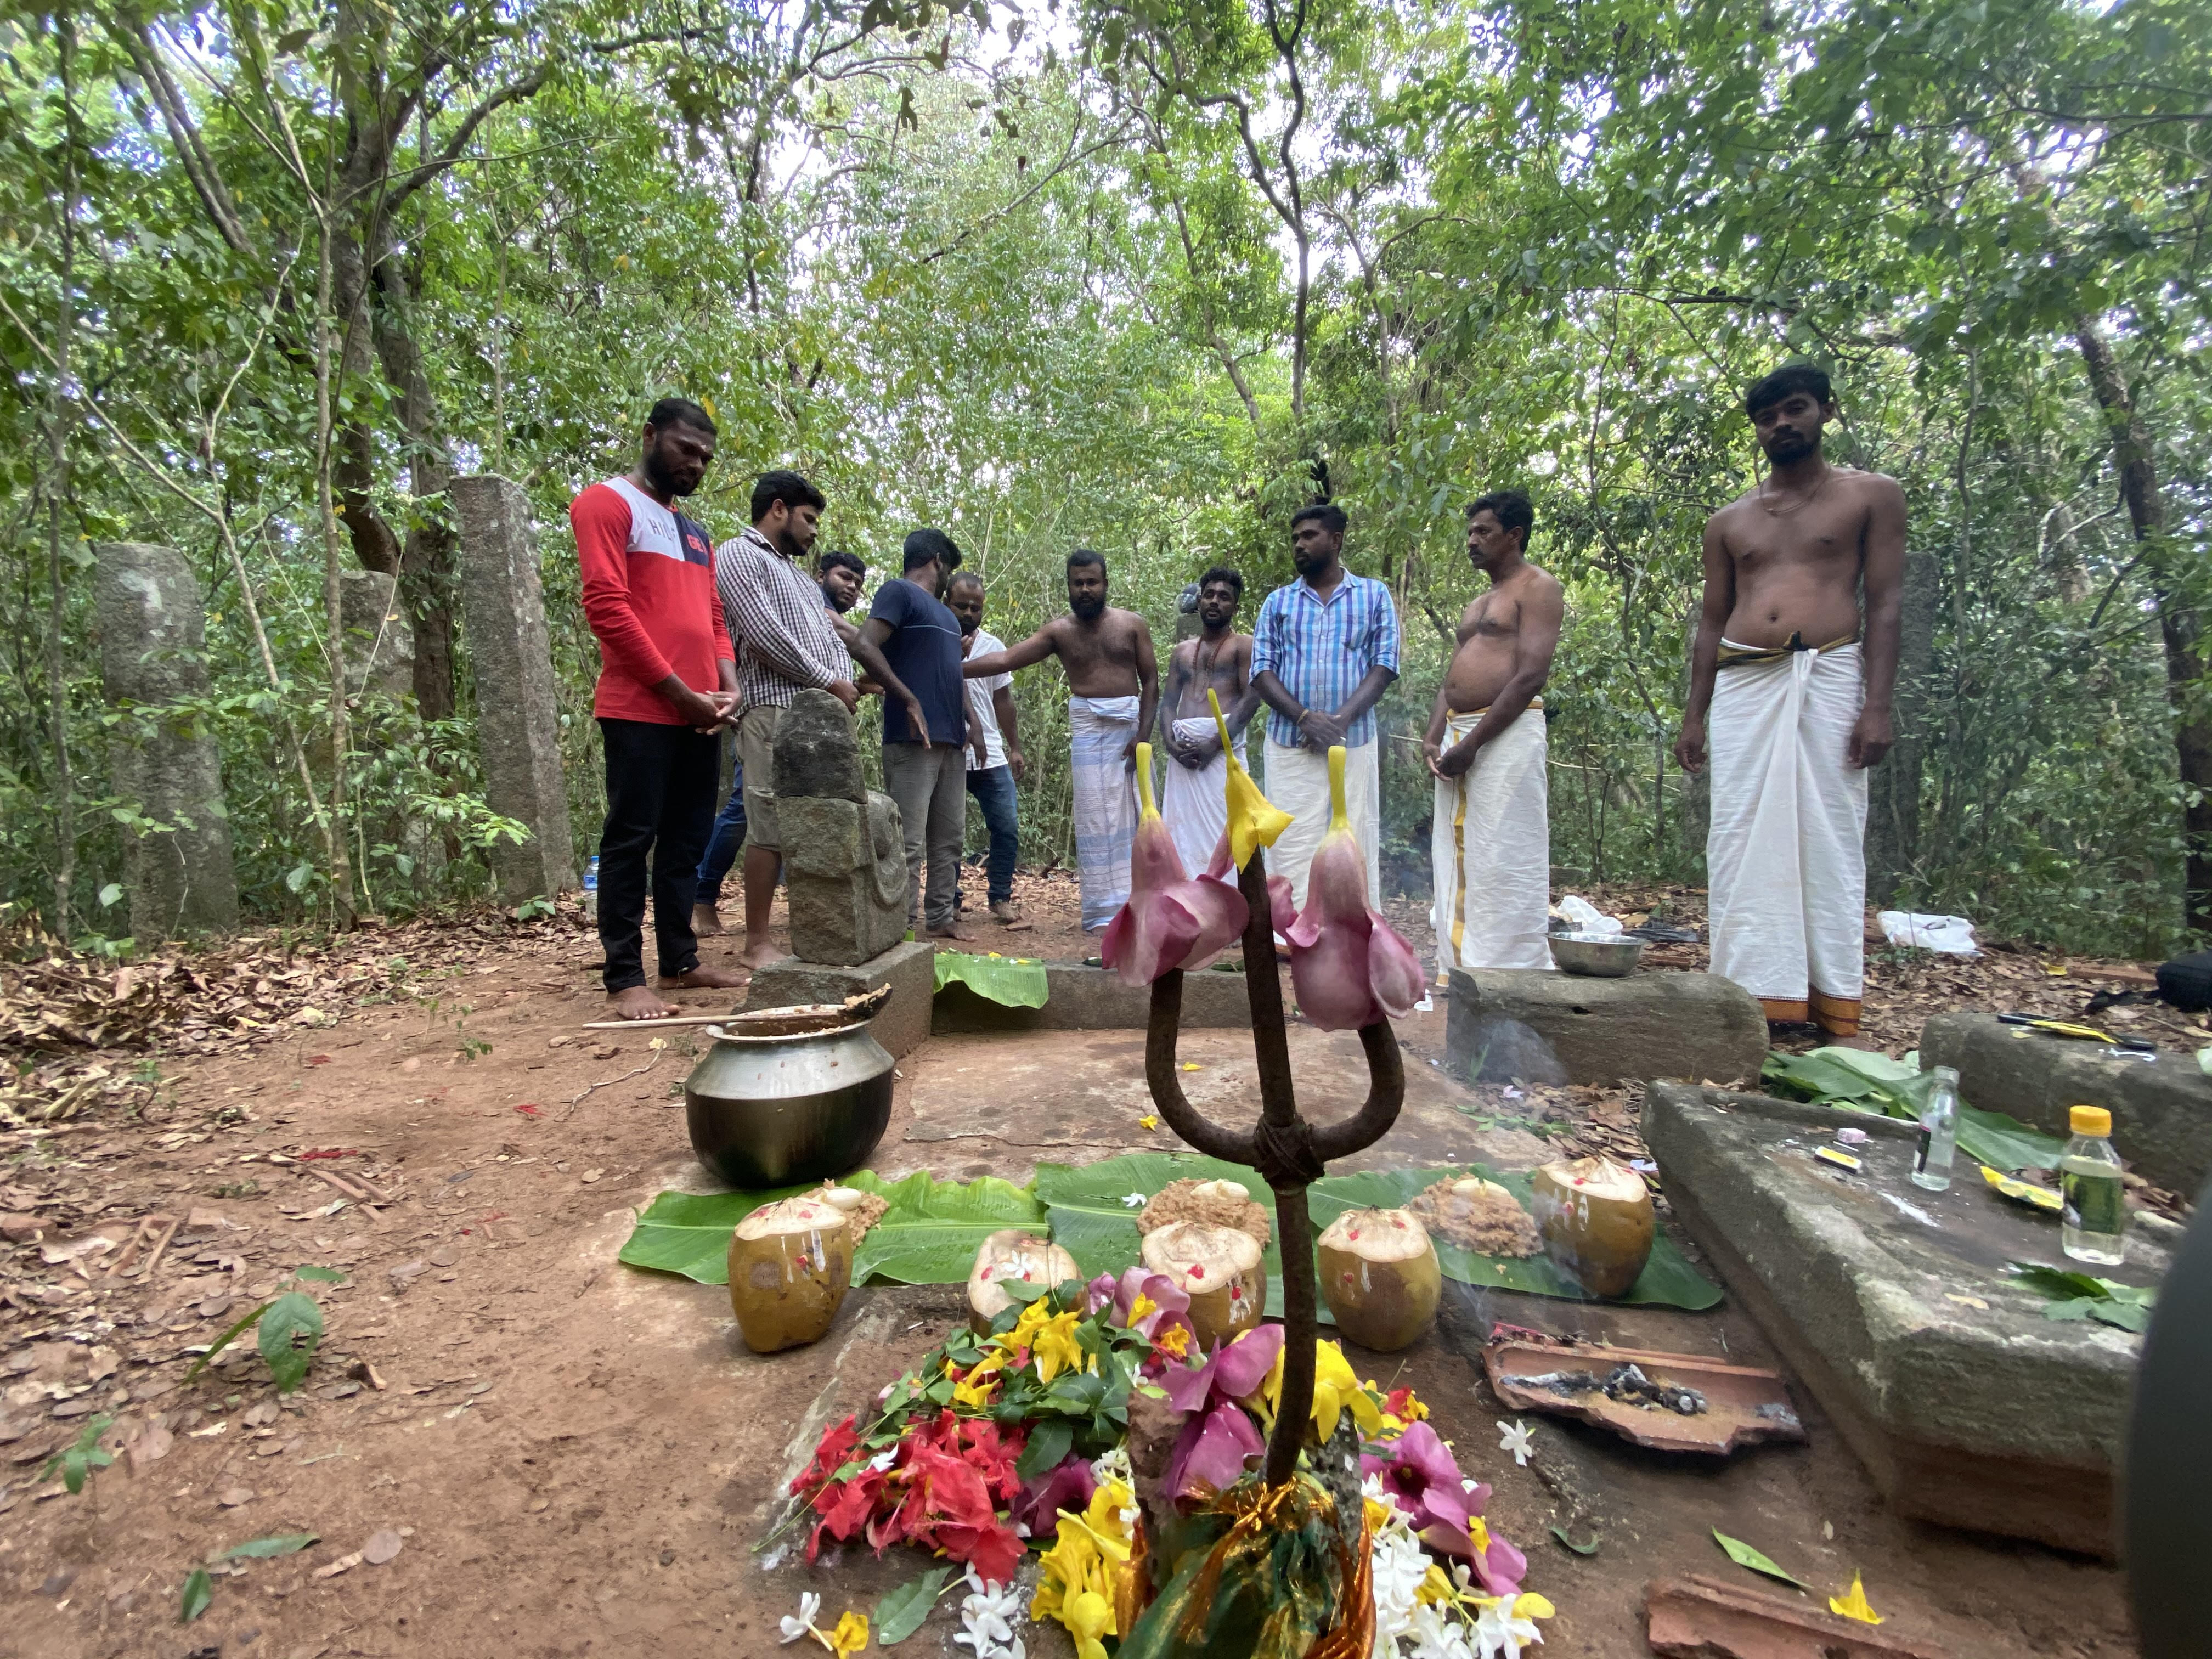 Tamils reviving ancient temple threatened by Buddhist monks | Tamil Guardian